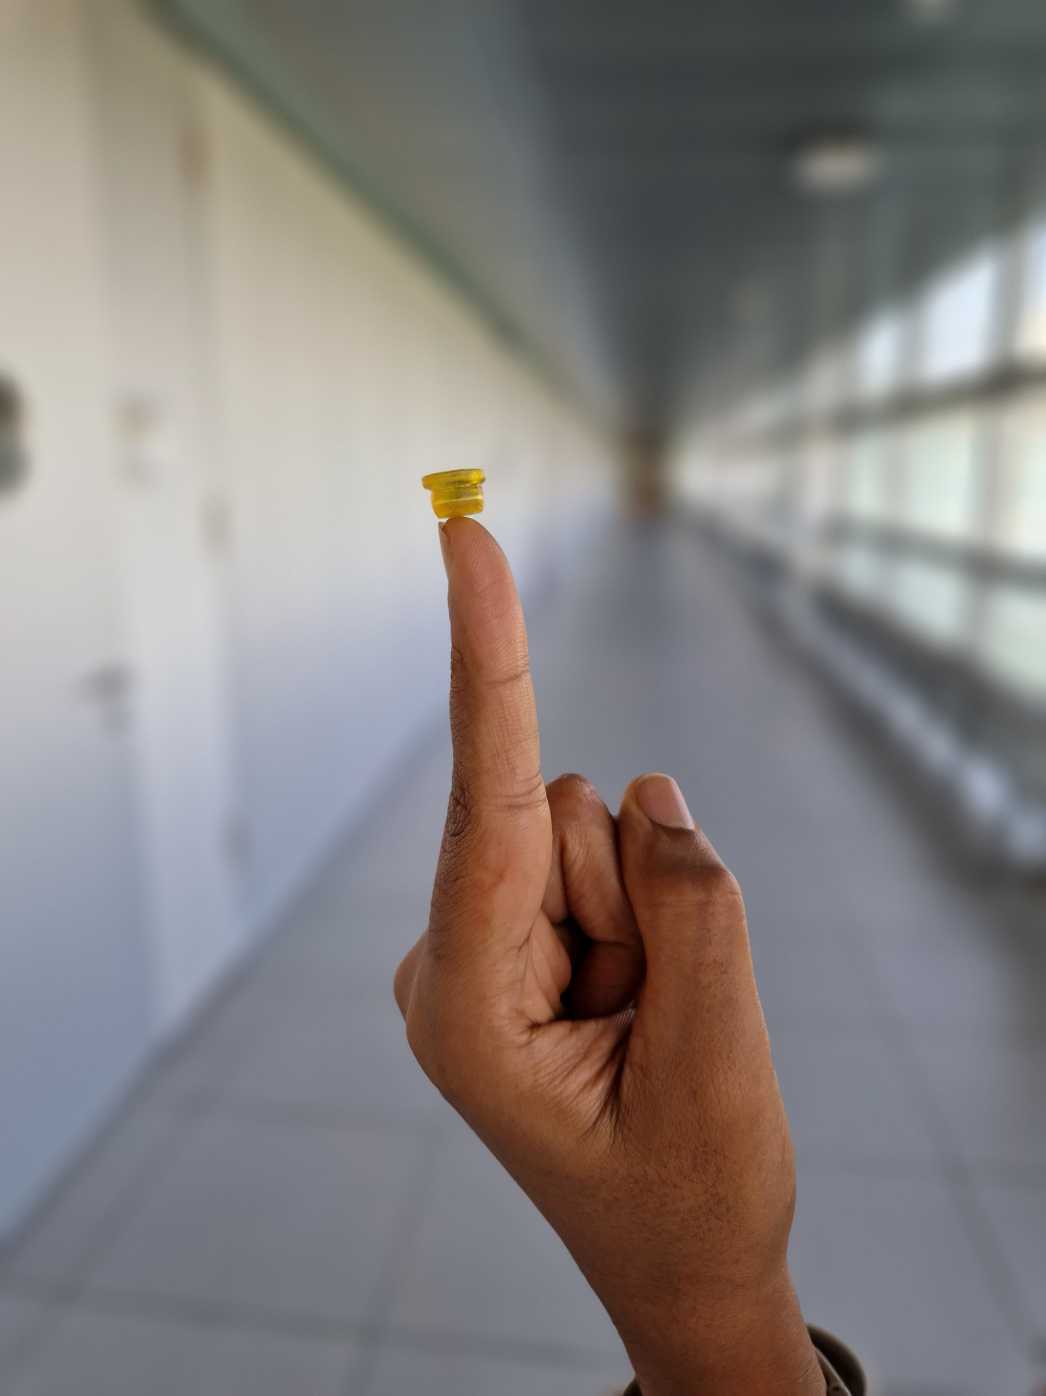 A person holds the suction cup on their finger tip.